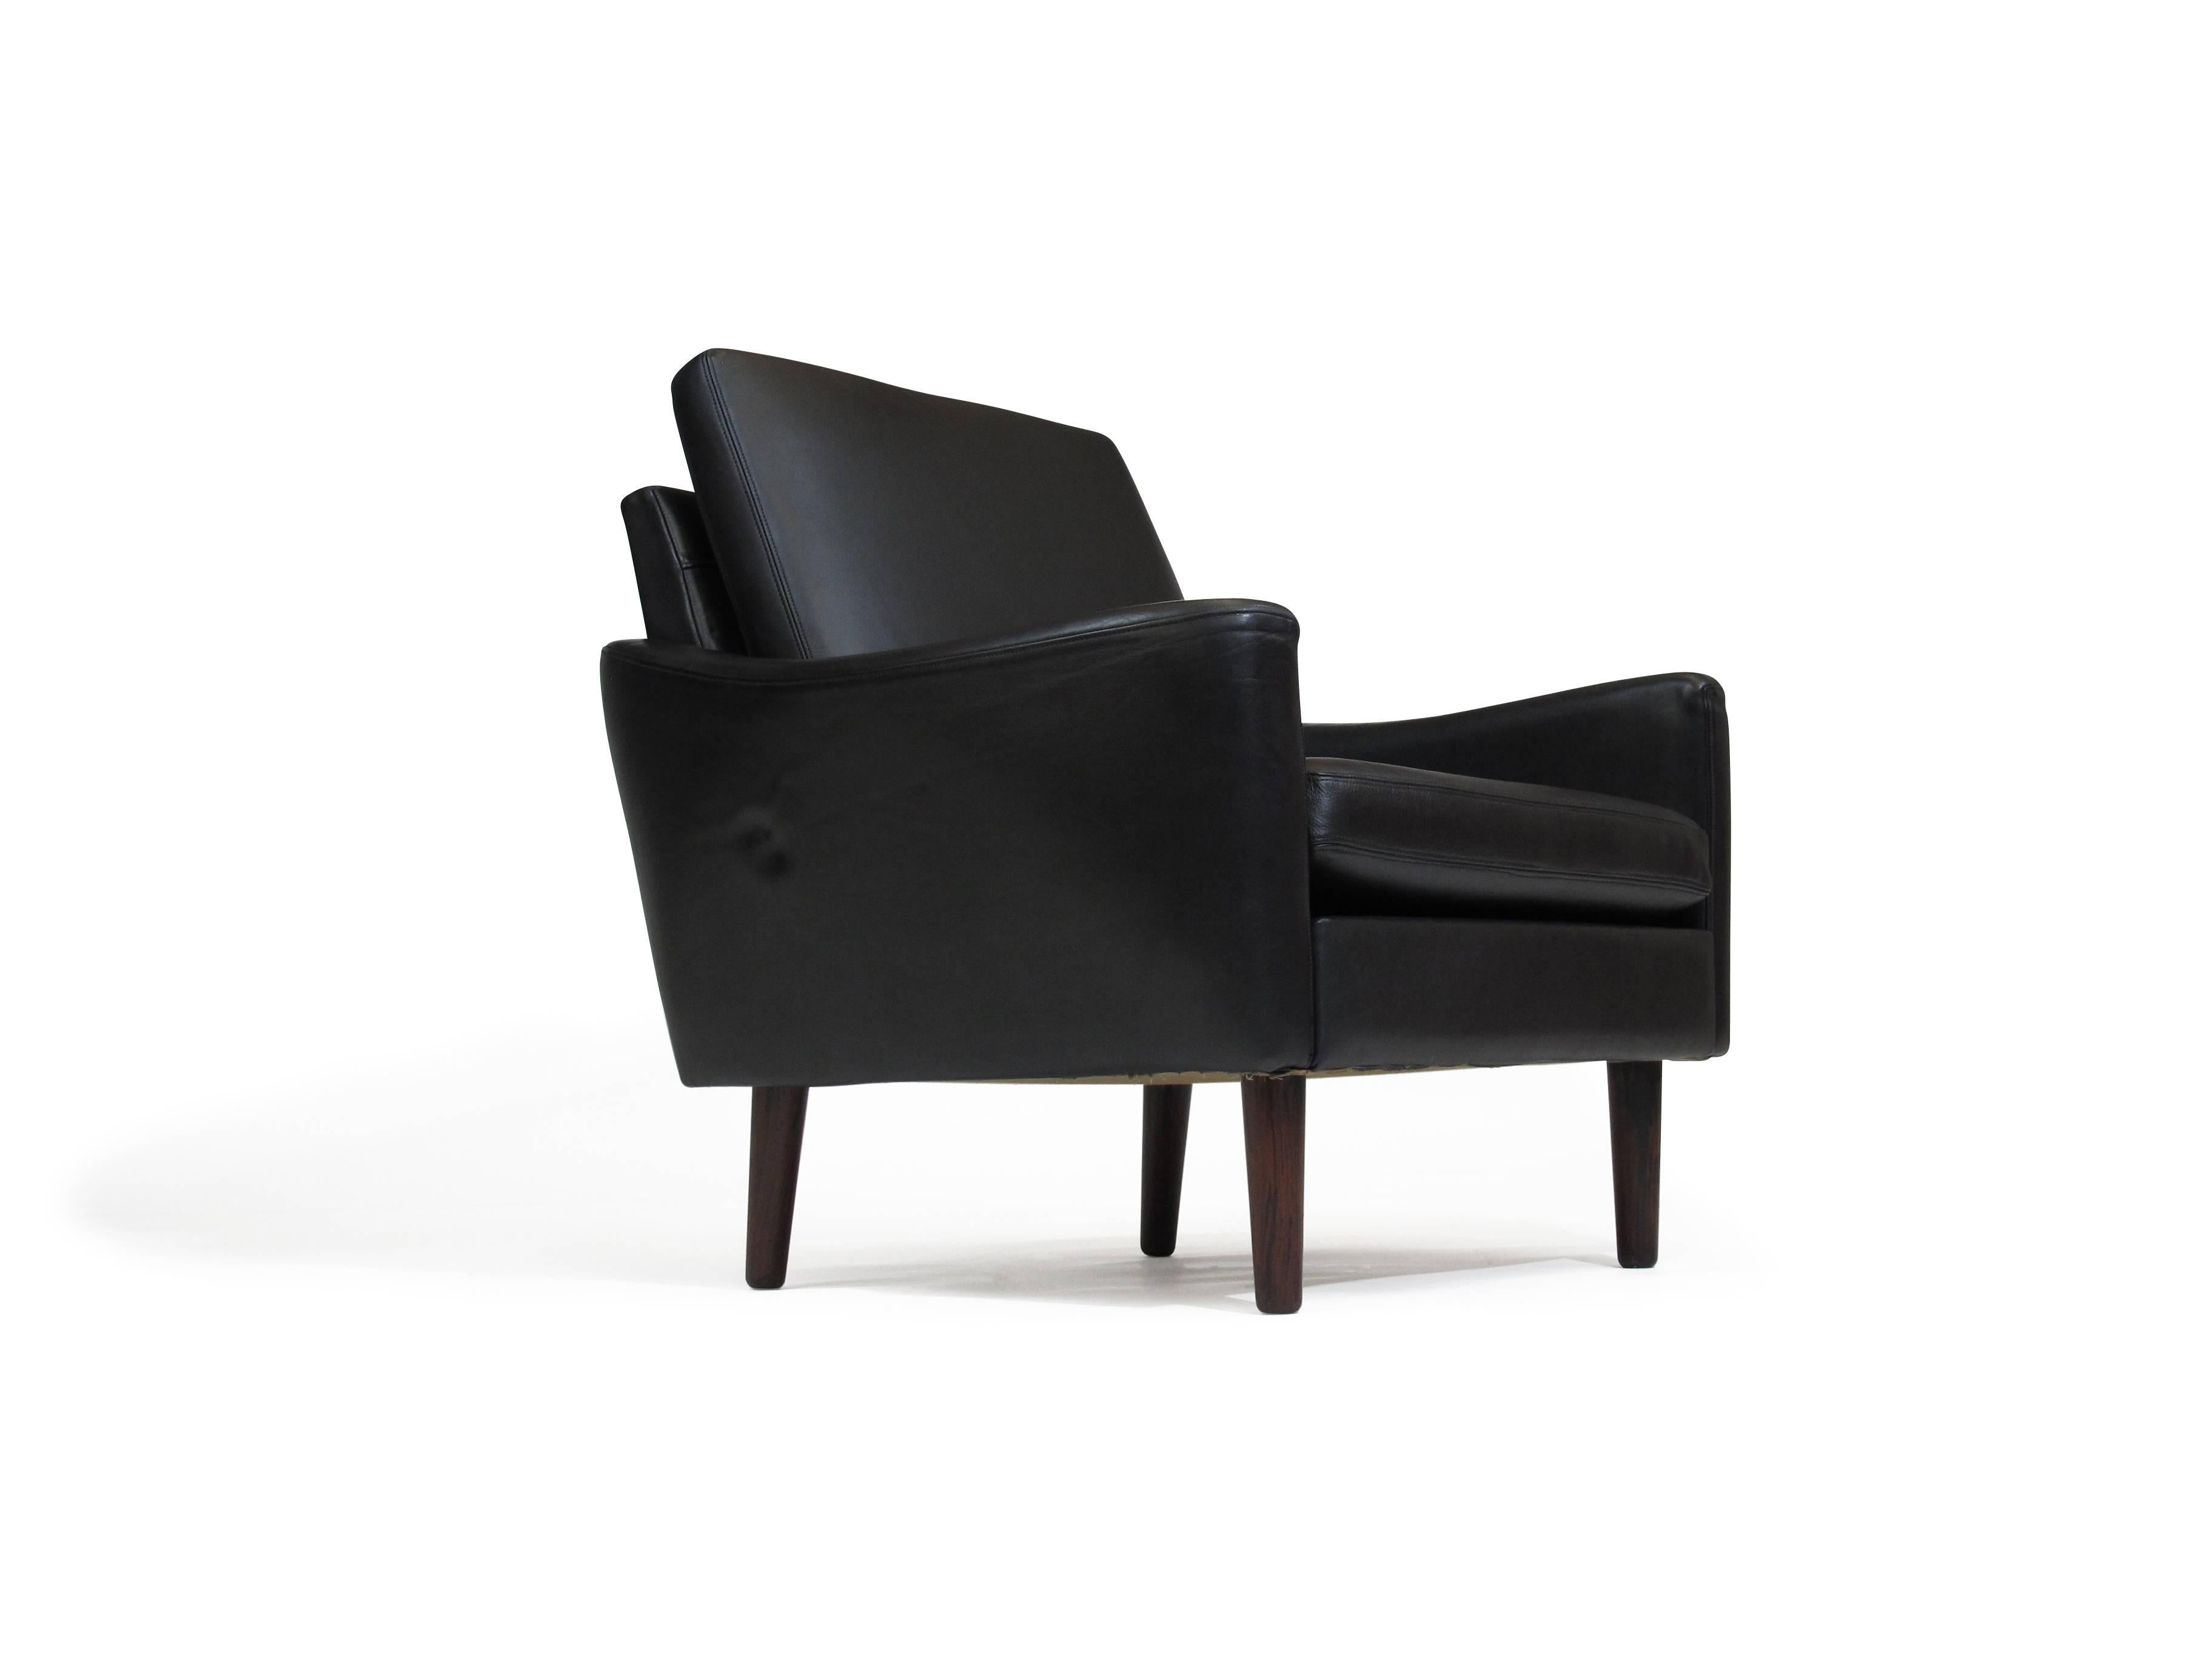 Pair of midcentury black leather lounge chairs crafted of a solid wood frame upholstered in the original vintage black leather with newly upholstered seat and back cushions.